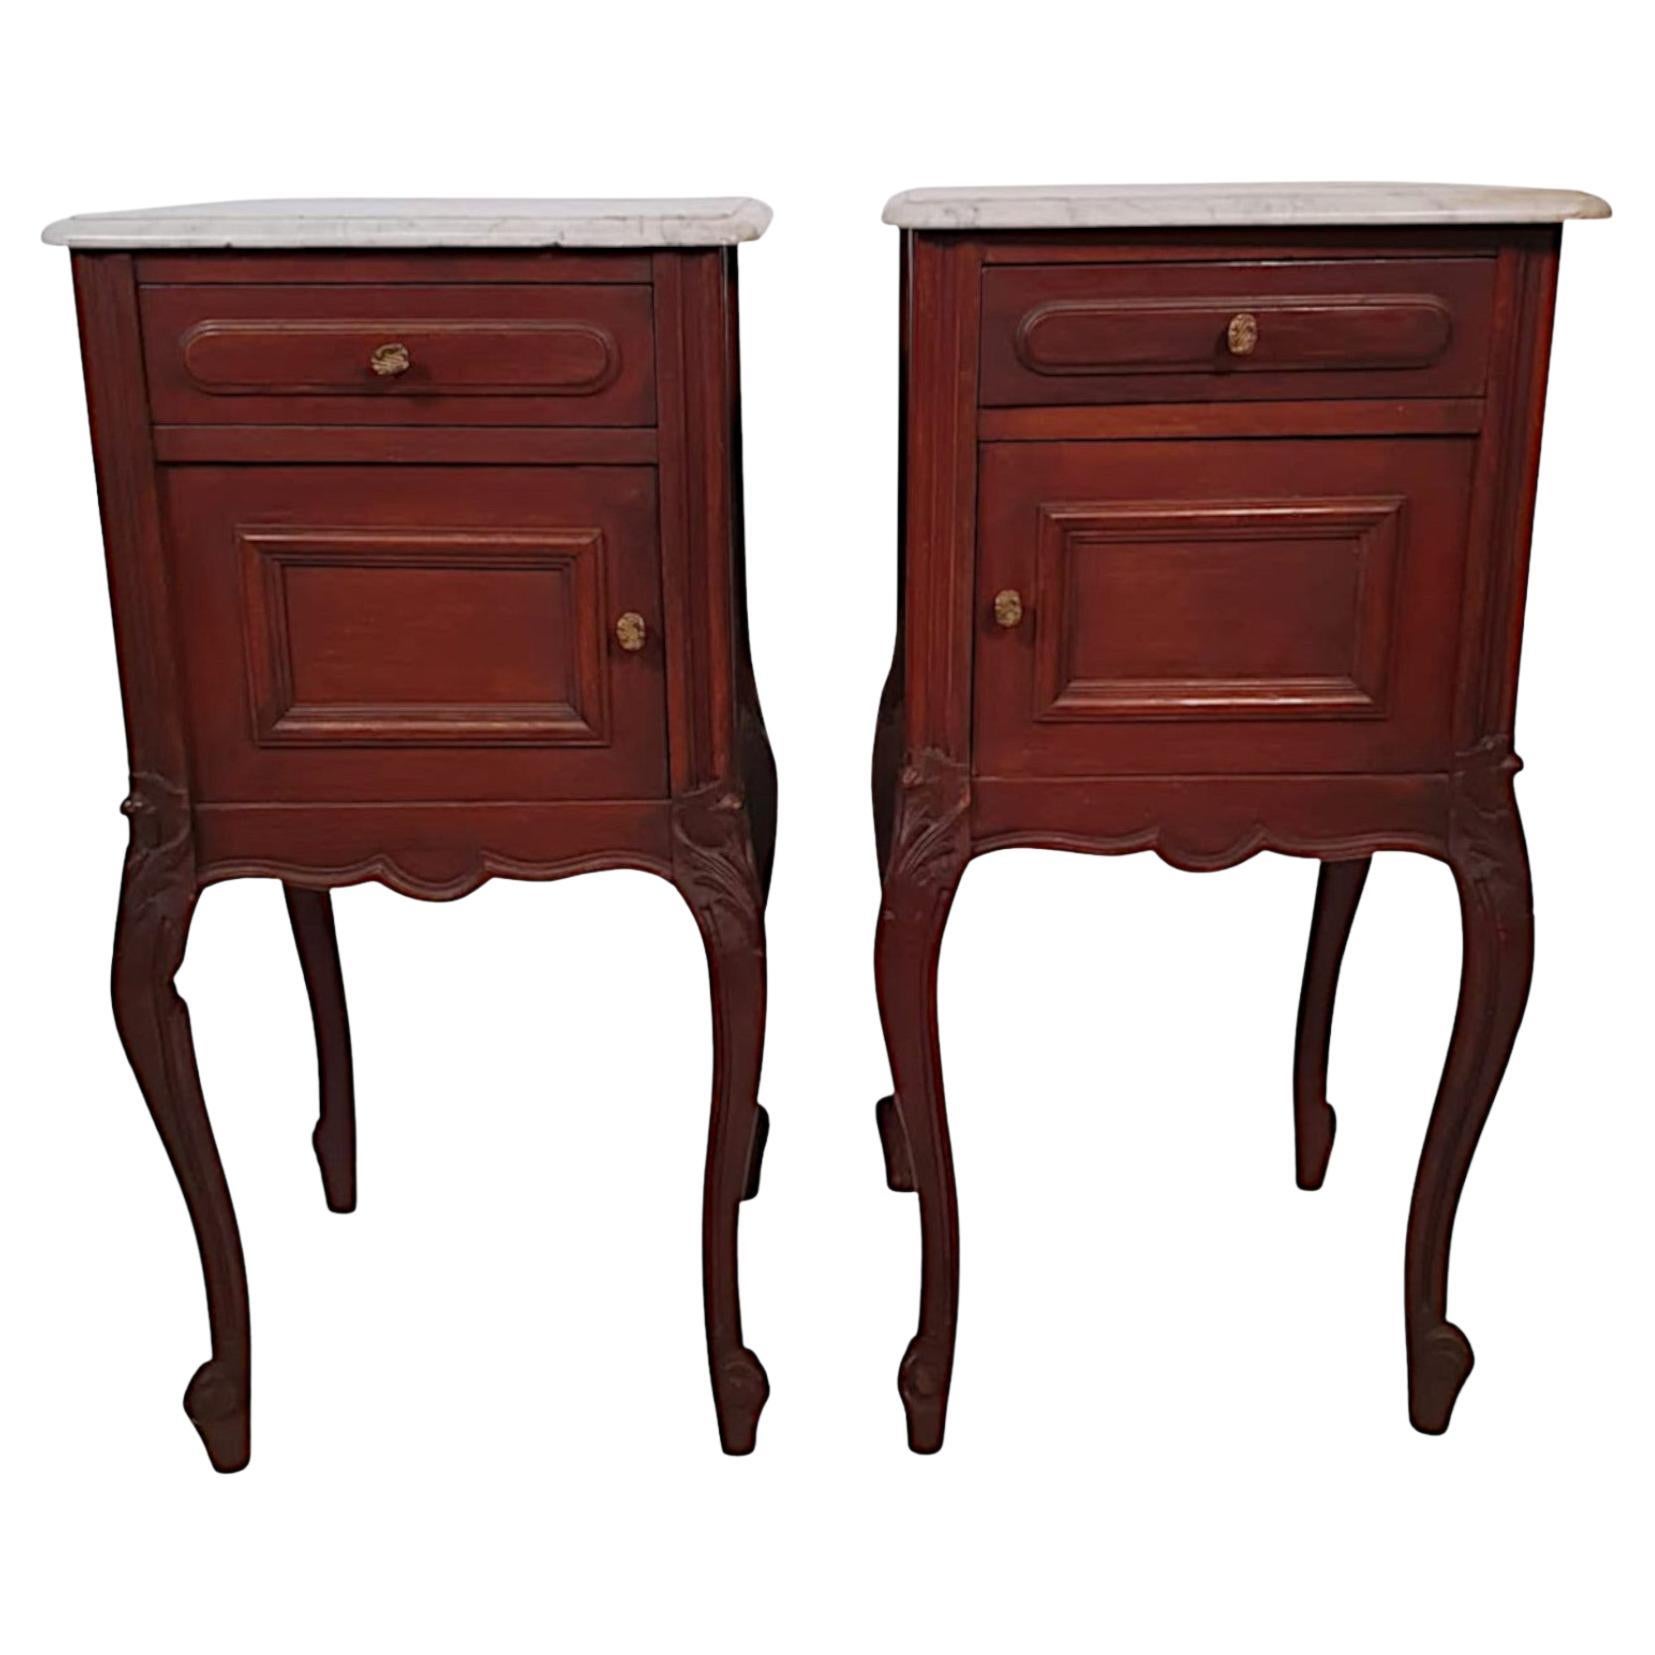 A Stunning Pair of 19th Century French Marble Top Bedside Lockers For Sale